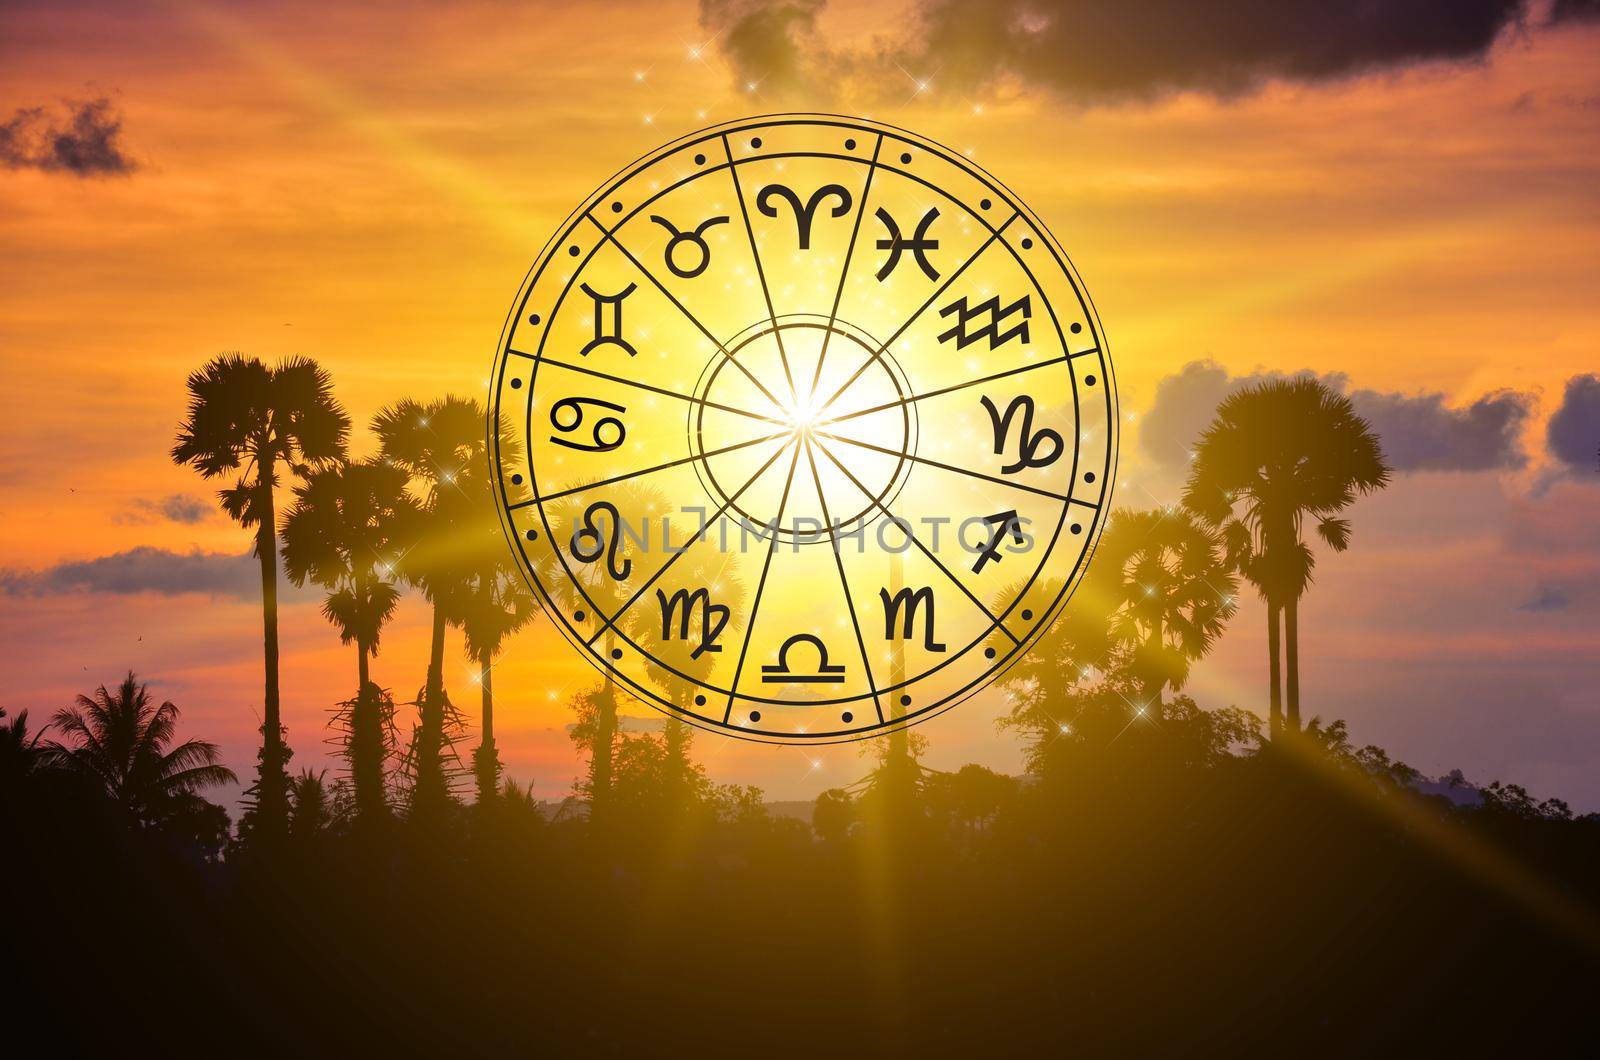 Zodiac signs inside of horoscope circle astrology and horoscopes concept by sarayut_thaneerat